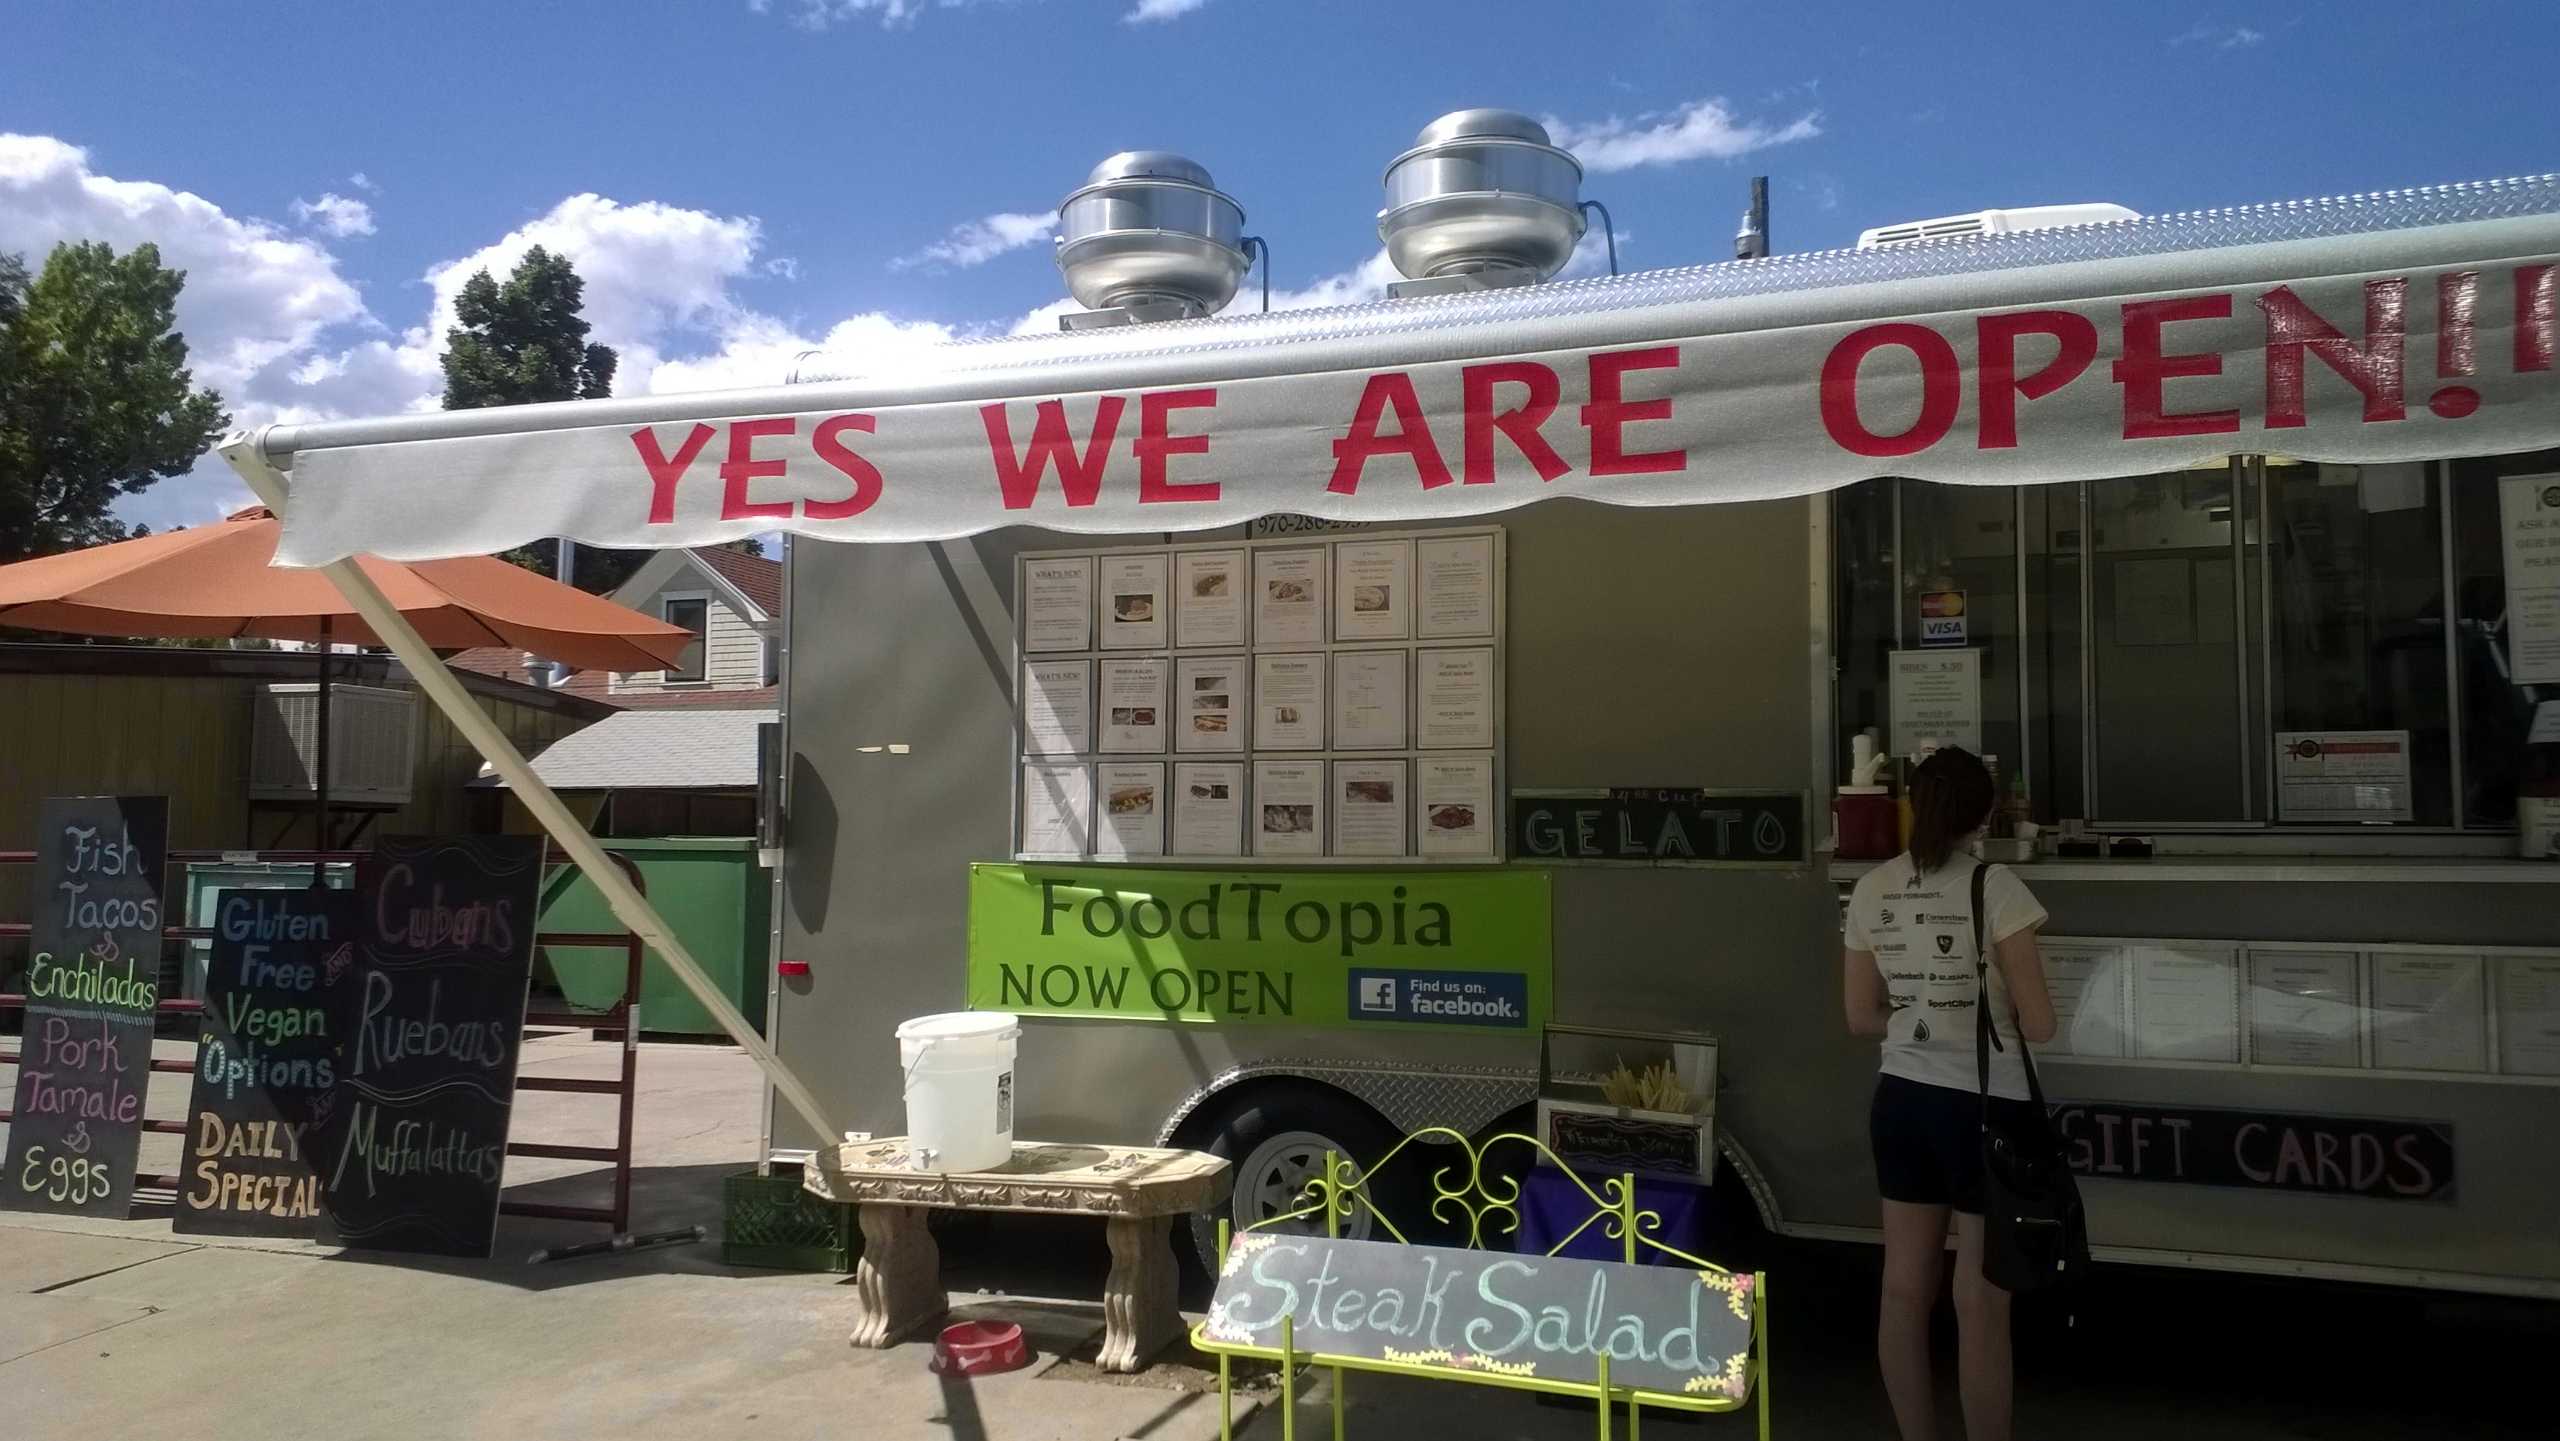 Foodtopia food truck, yes we are open, Fort Collins